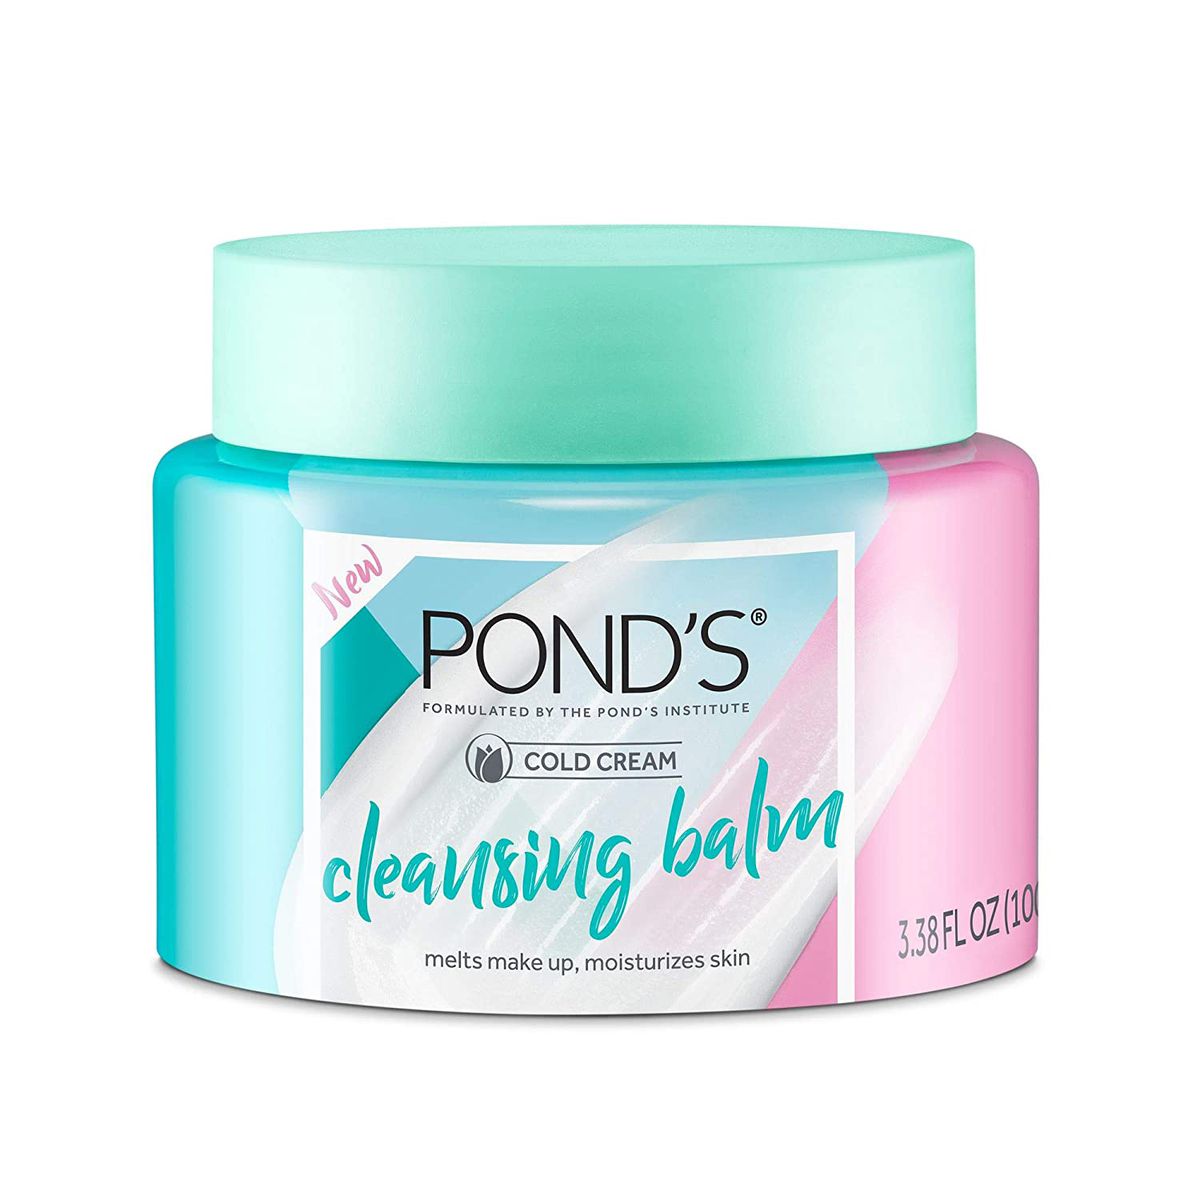 Pond's Cleansing Balm